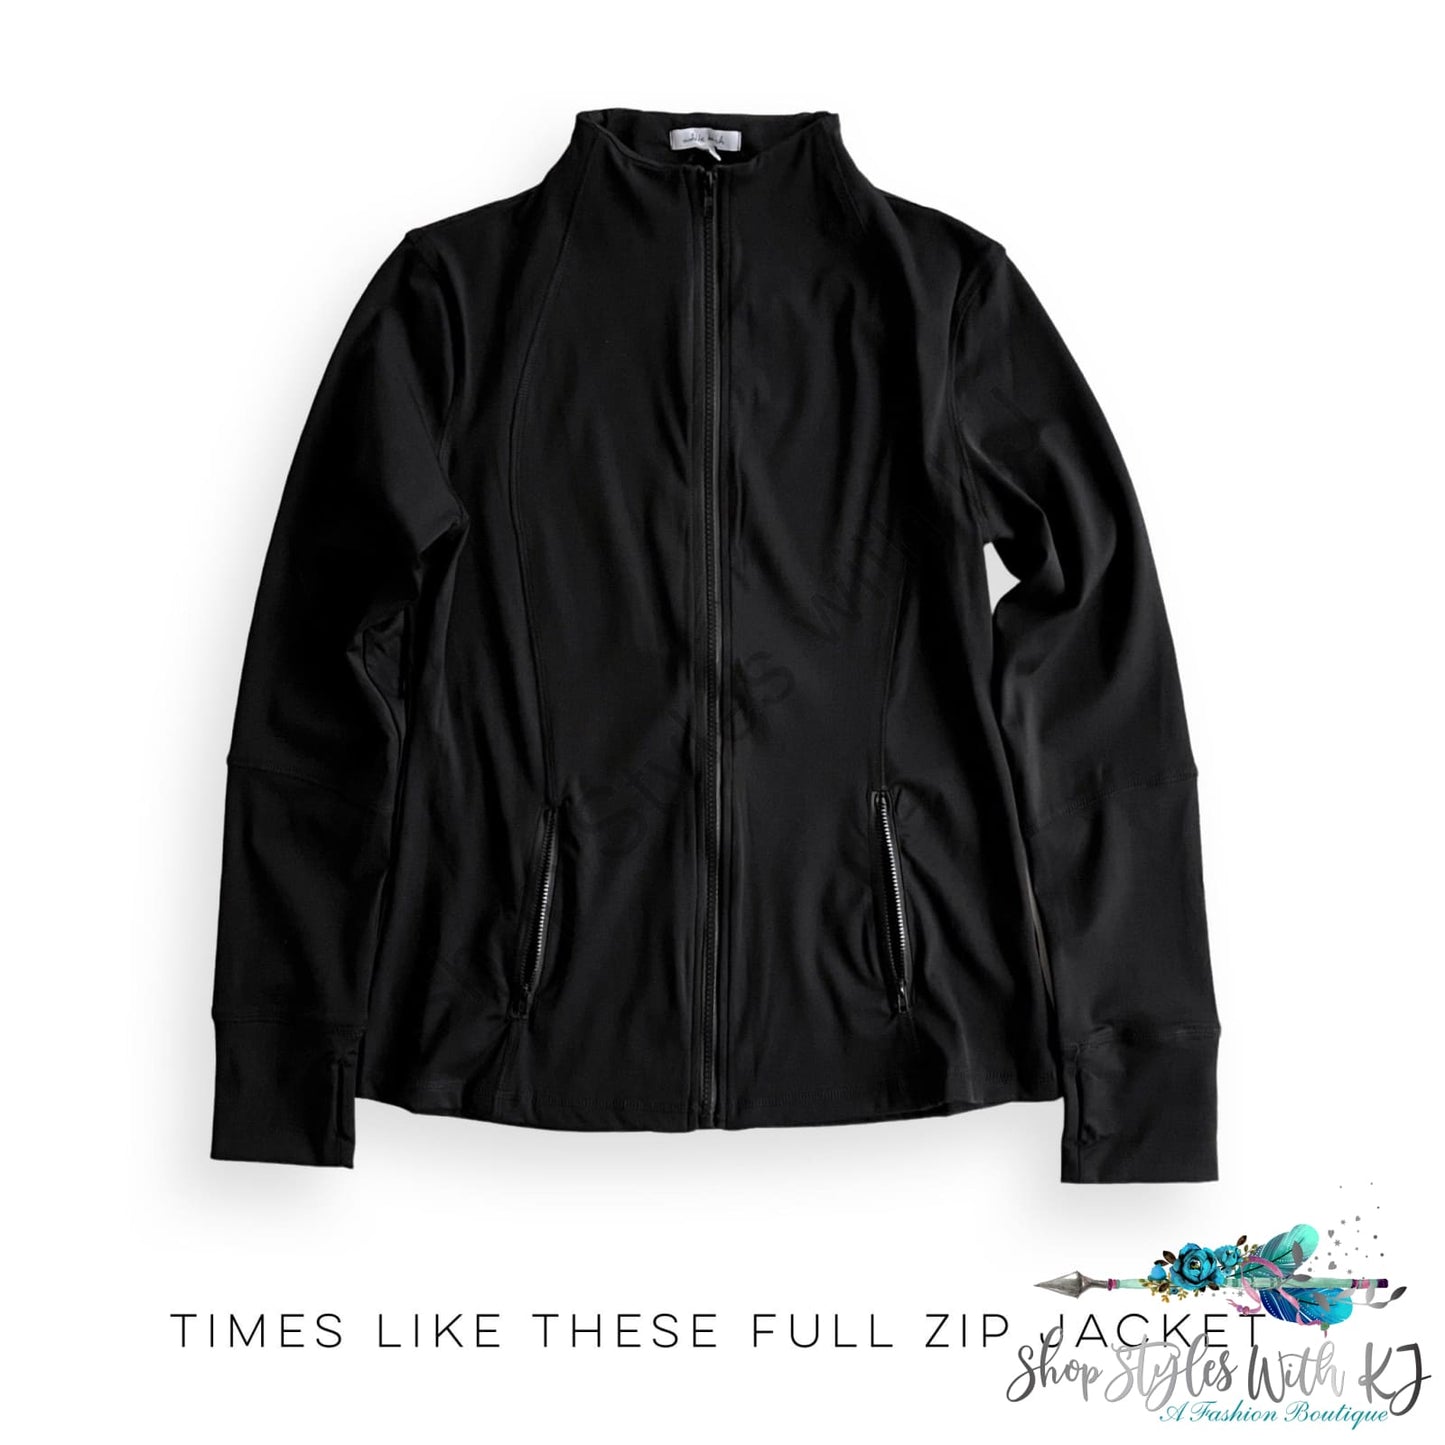 Times Like These Full Zip Jacket White Birch